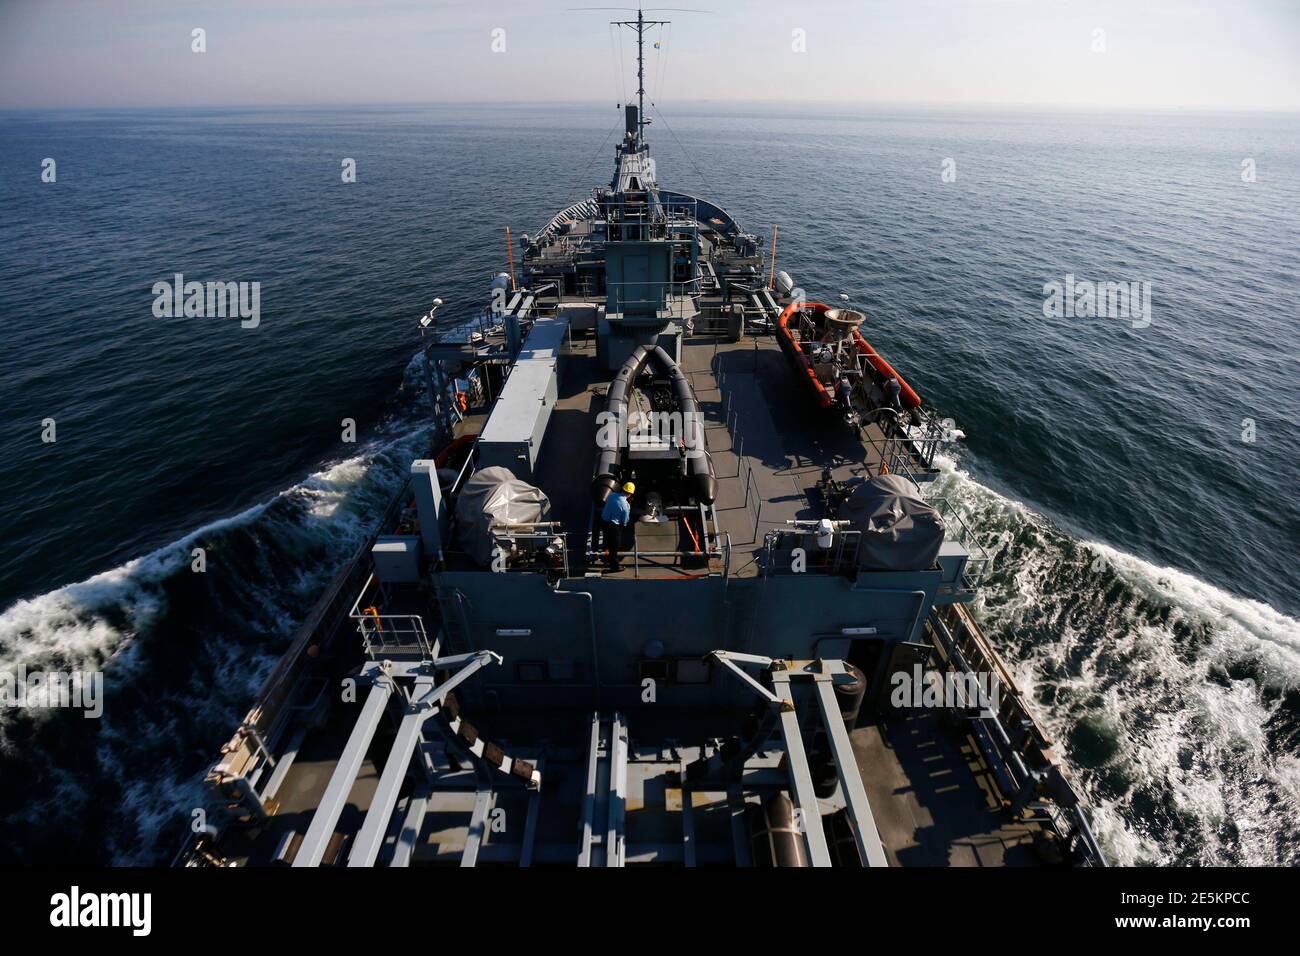 View from the bridge of the German Navy Tender A515 as it sails during NATO Submarine Rescue Exercise Dynamic Monarch on Gdansk Bay, near Hel in the Baltic Sea, May 22, 2014.   REUTERS/Kacper Pempel (POLAND - Tags: MILITARY MARITIME) Stock Photo